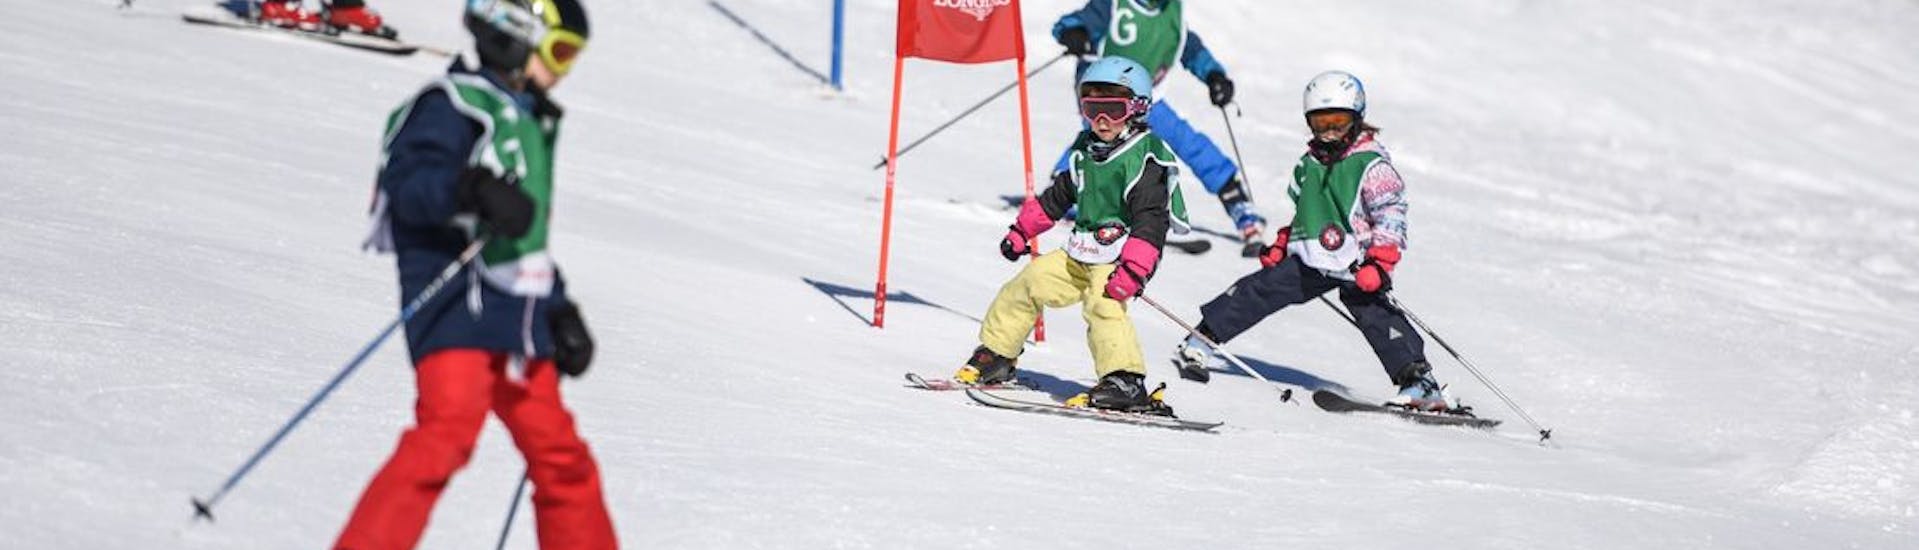 Kids Ski Lessons (5-15 y.) for All Levels.